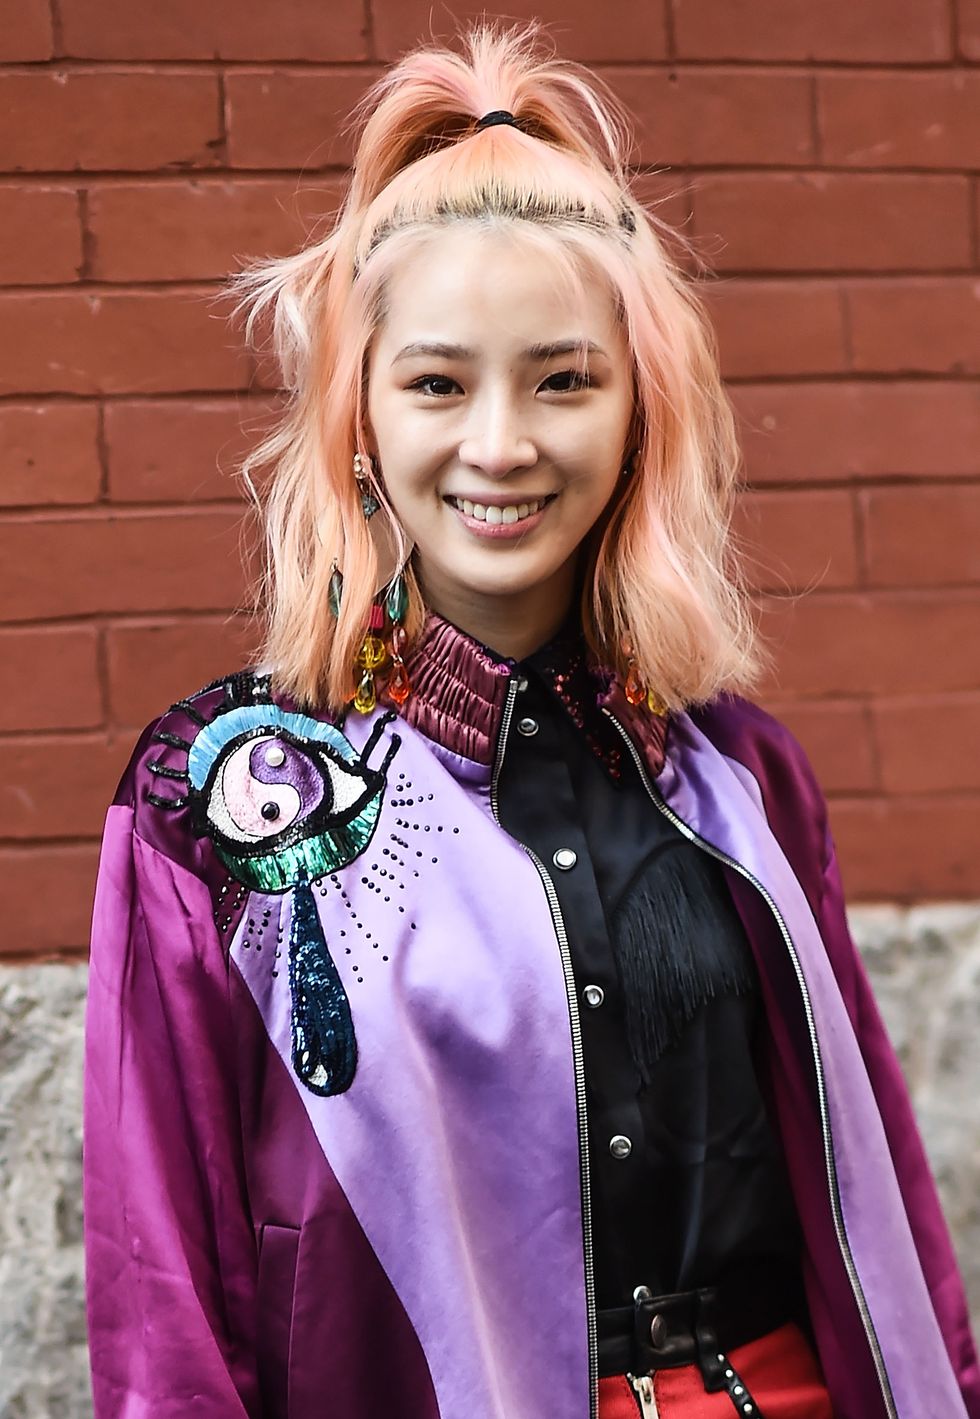 Hair, Clothing, Street fashion, Beauty, Purple, Blond, Hairstyle, Fashion, Pink, Outerwear, 